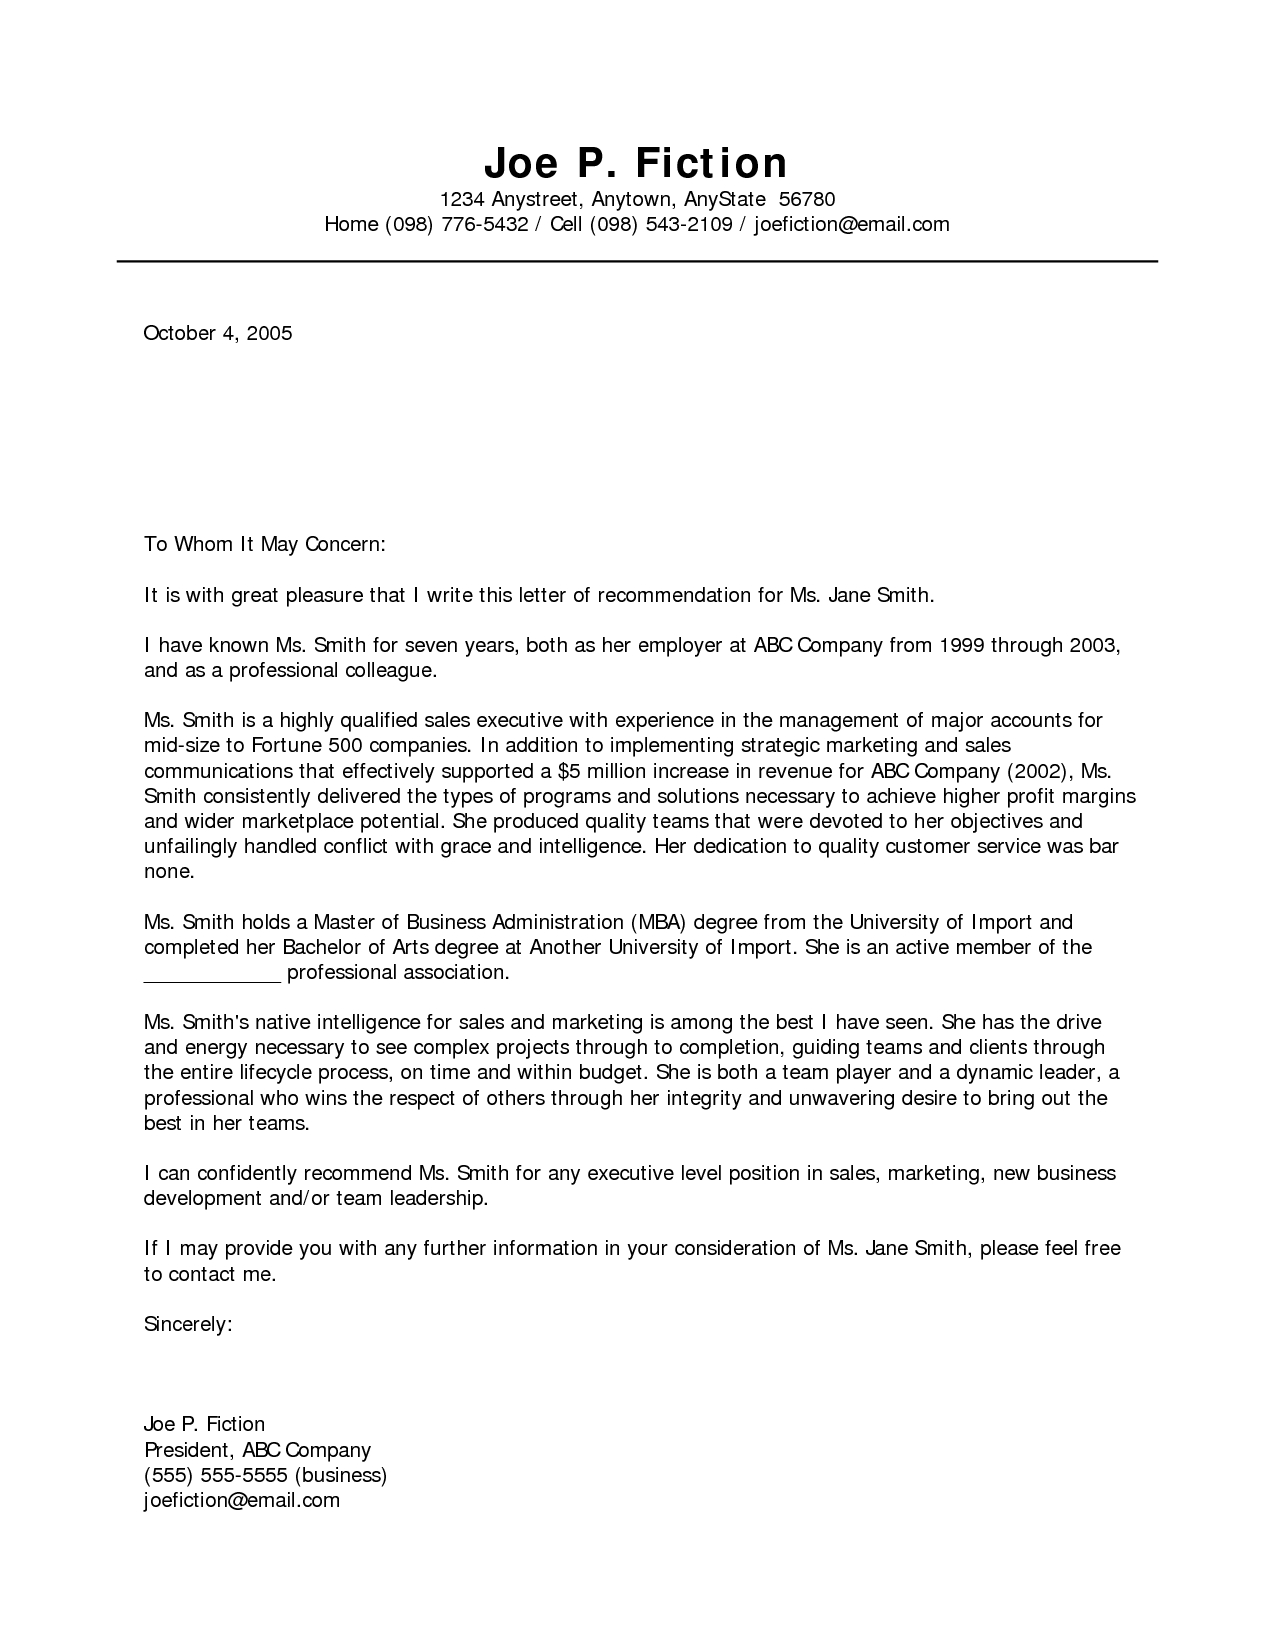 Letter Of Recommendation Template for Coworker - Business Re Mendation Letter Template Acurnamedia